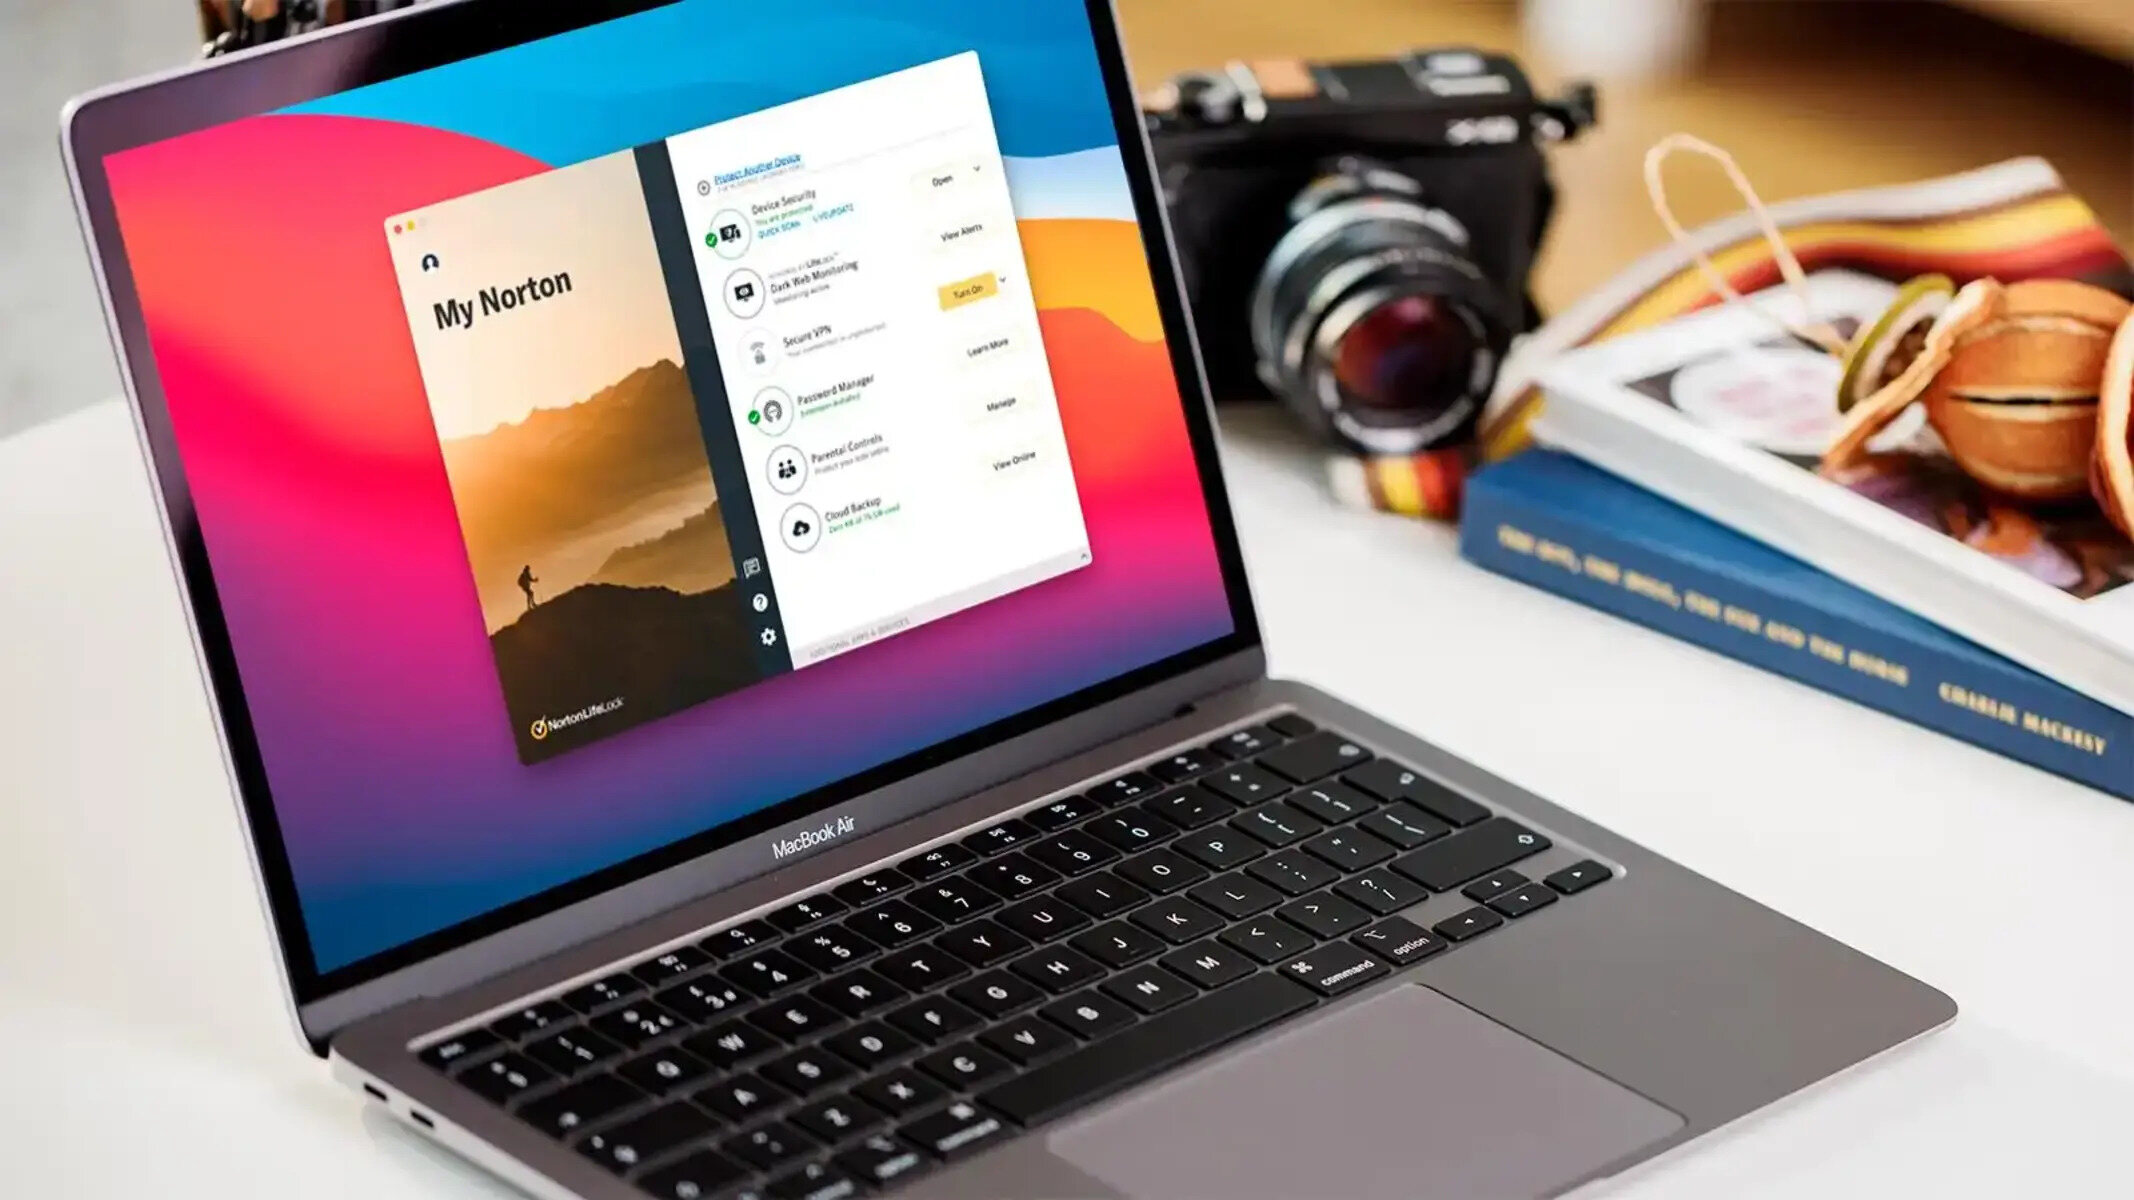 How To Install Norton Internet Security On Mac